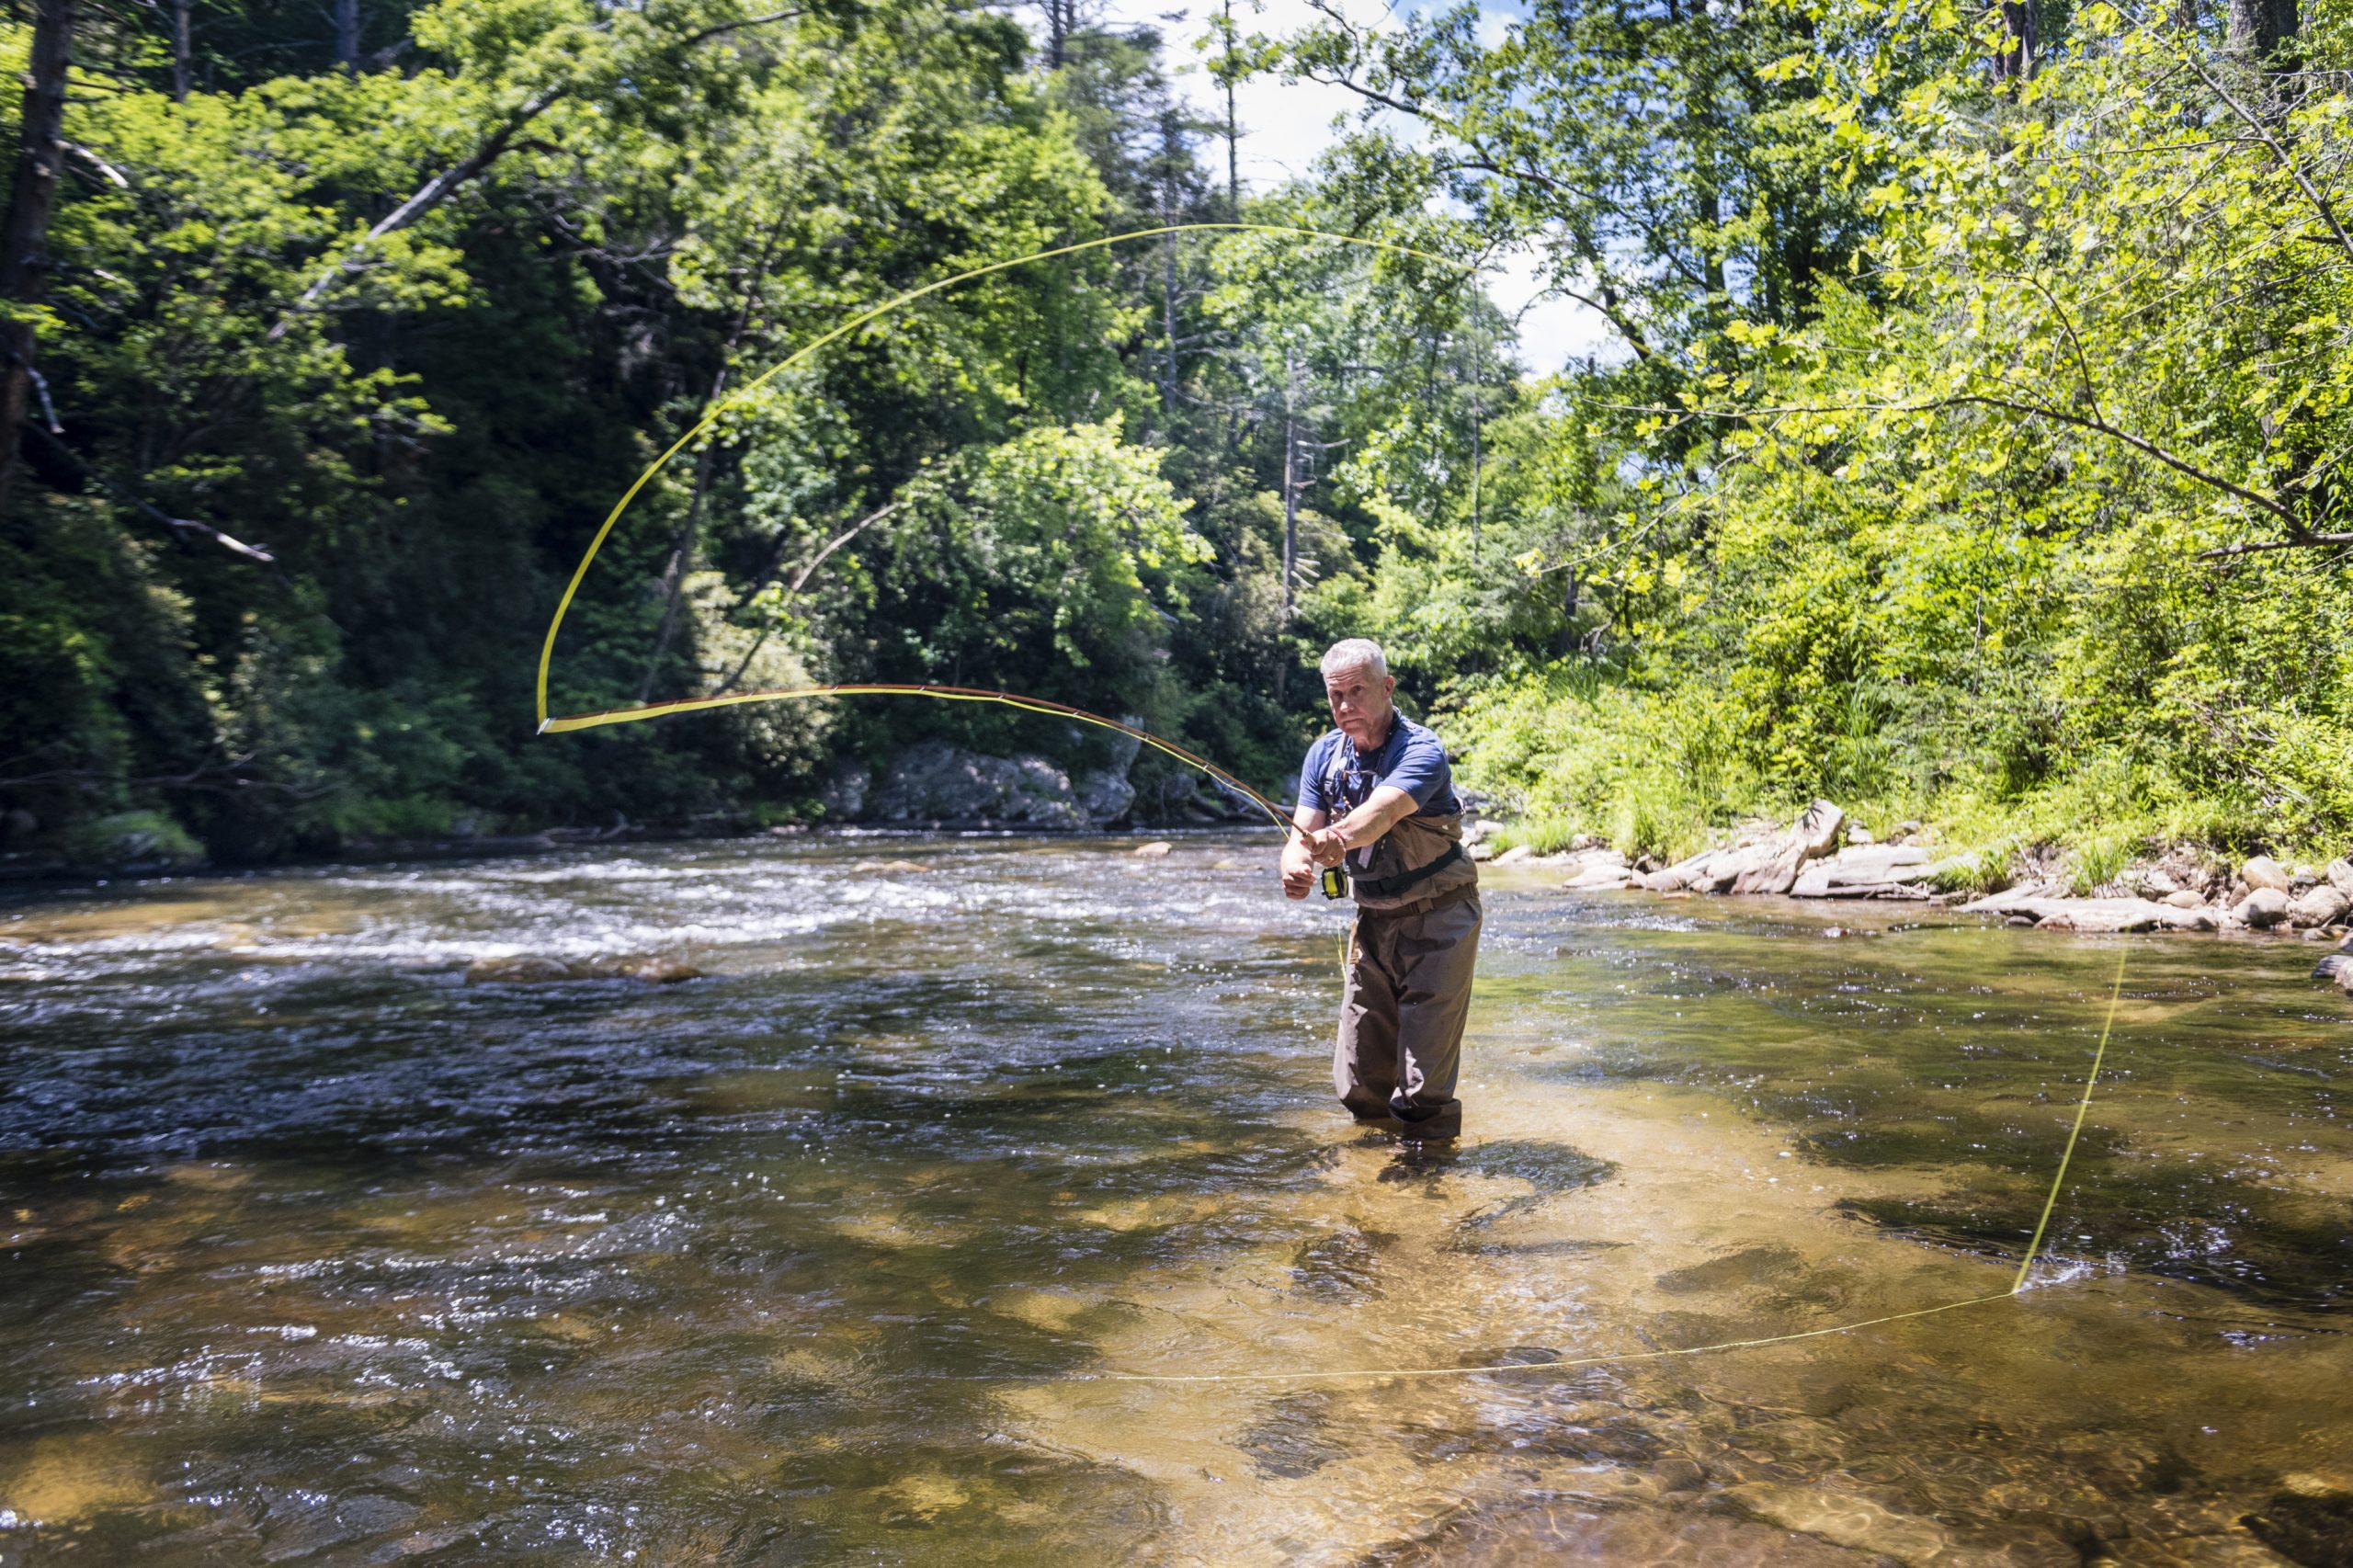 Subsistence fishing is great for dinner, but there's more to casting a line